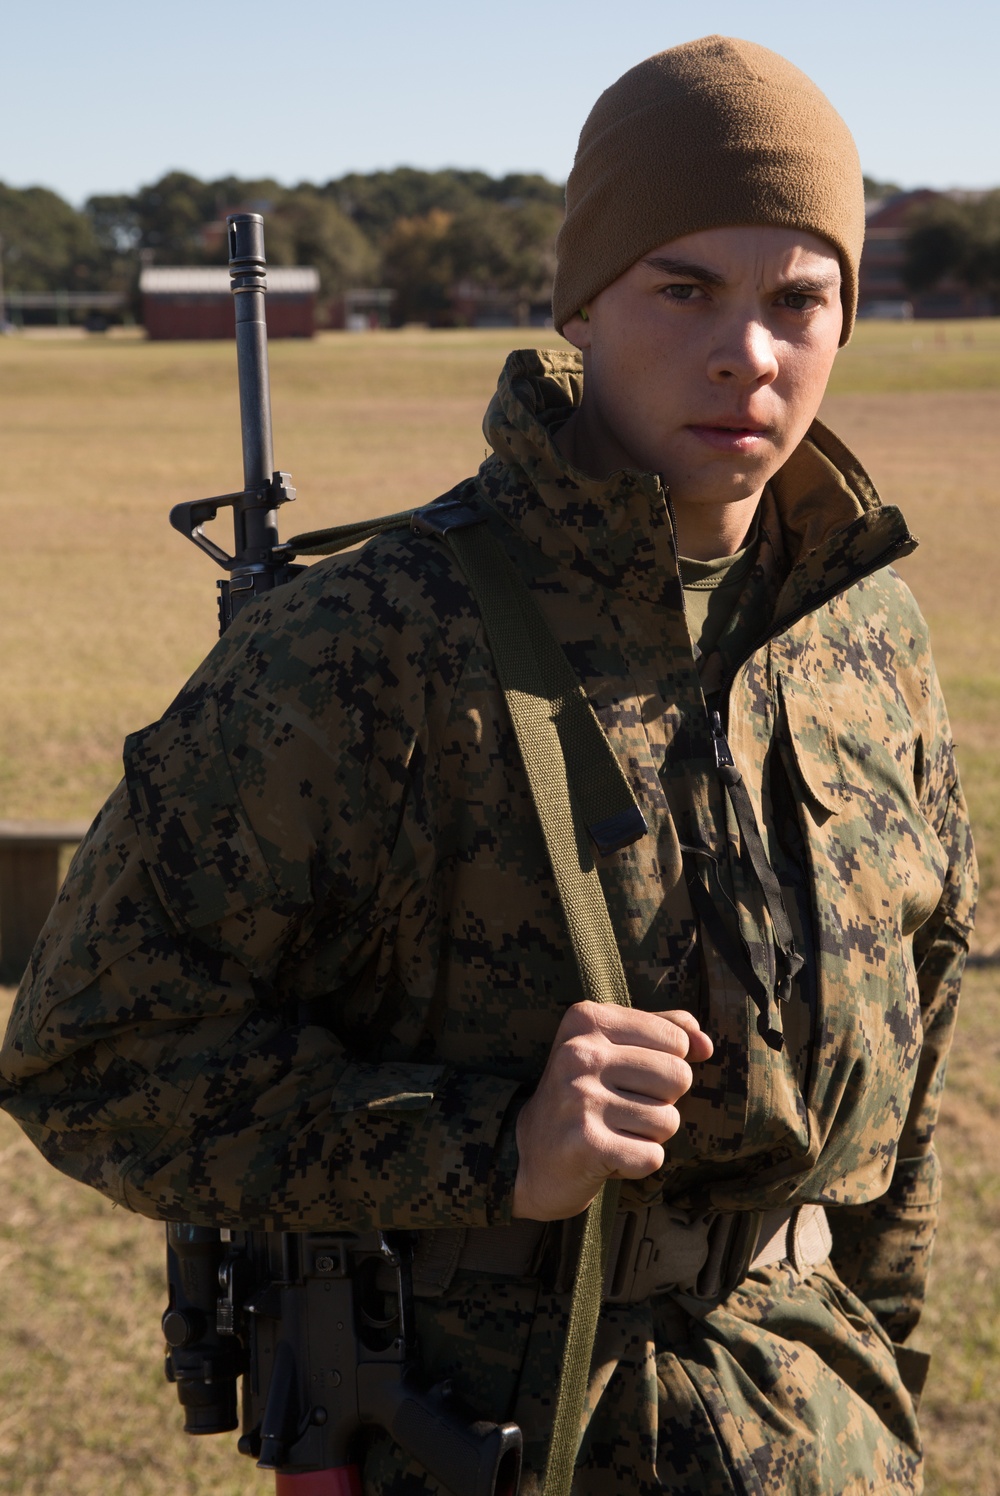 Lee, Mass., native training at Parris Island to become U.S. Marine